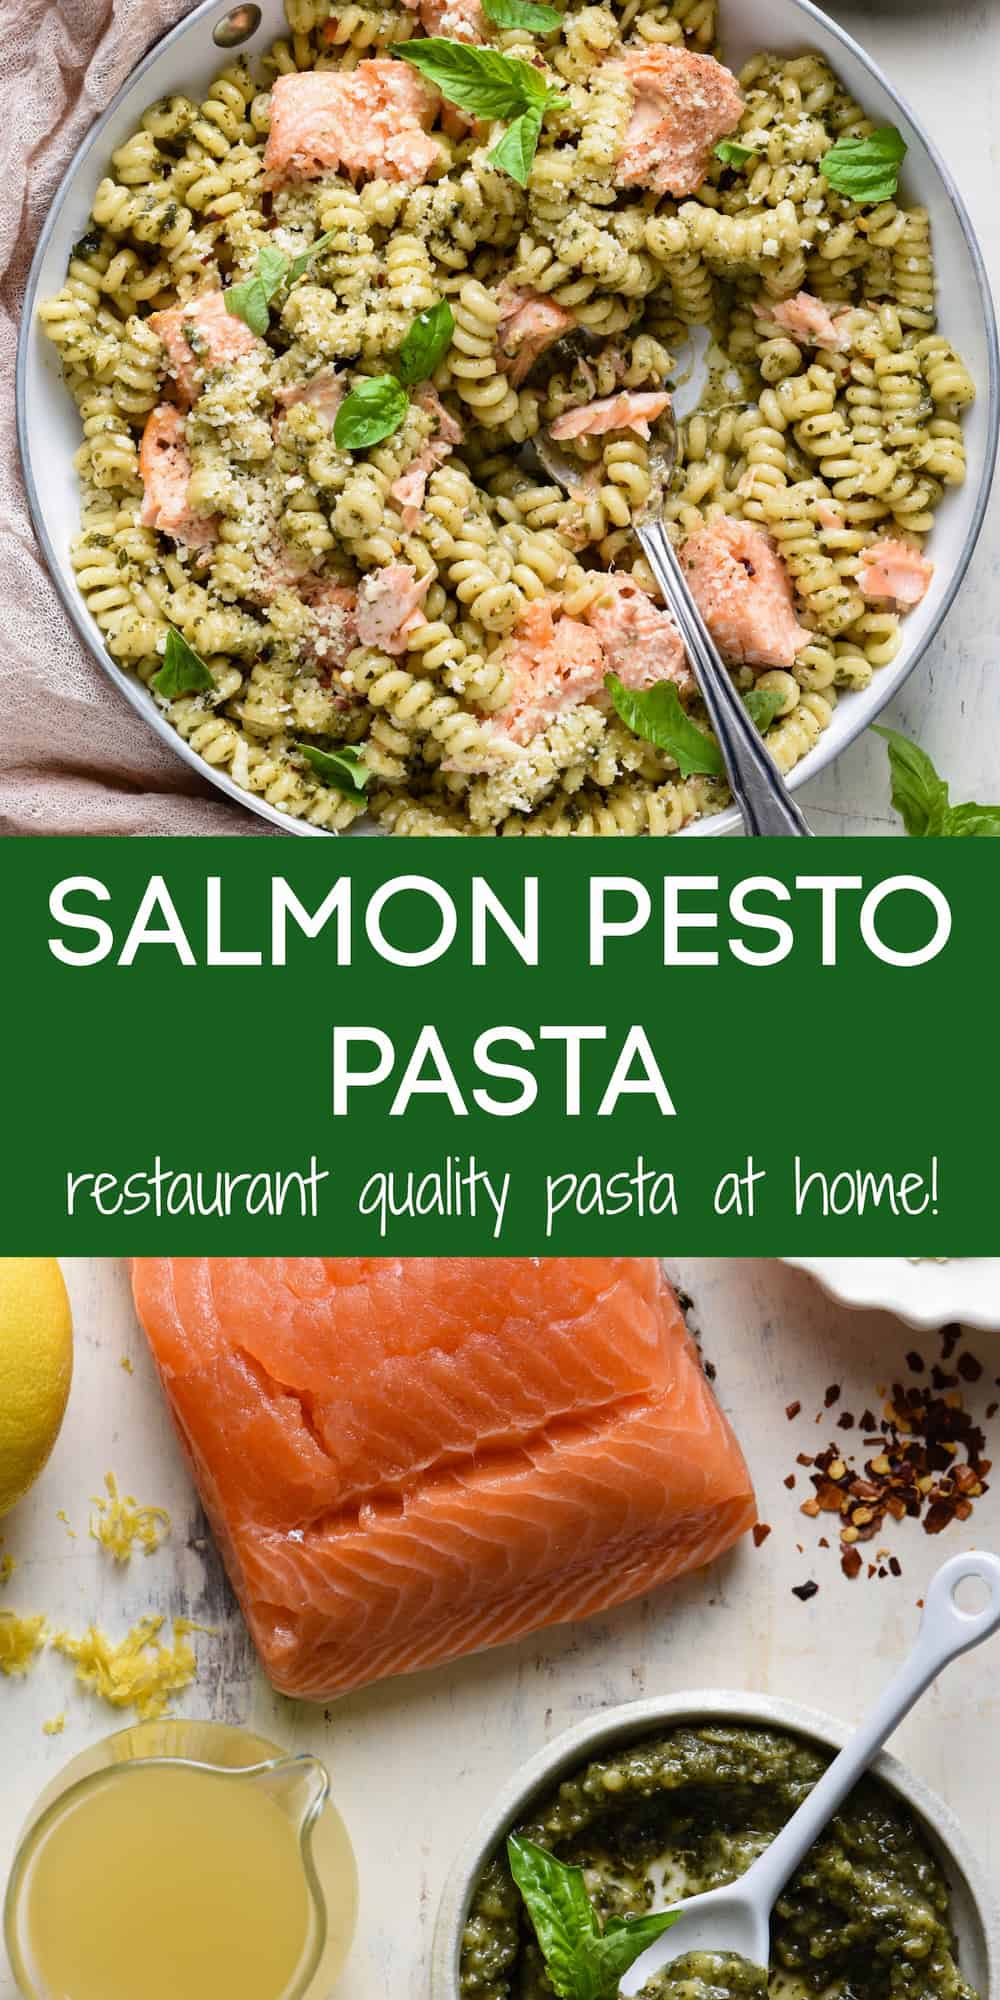 Collage of images of finished dish and ingredients, with overlay: SALMON PESTO PASTA restaurant quality pasta at home!